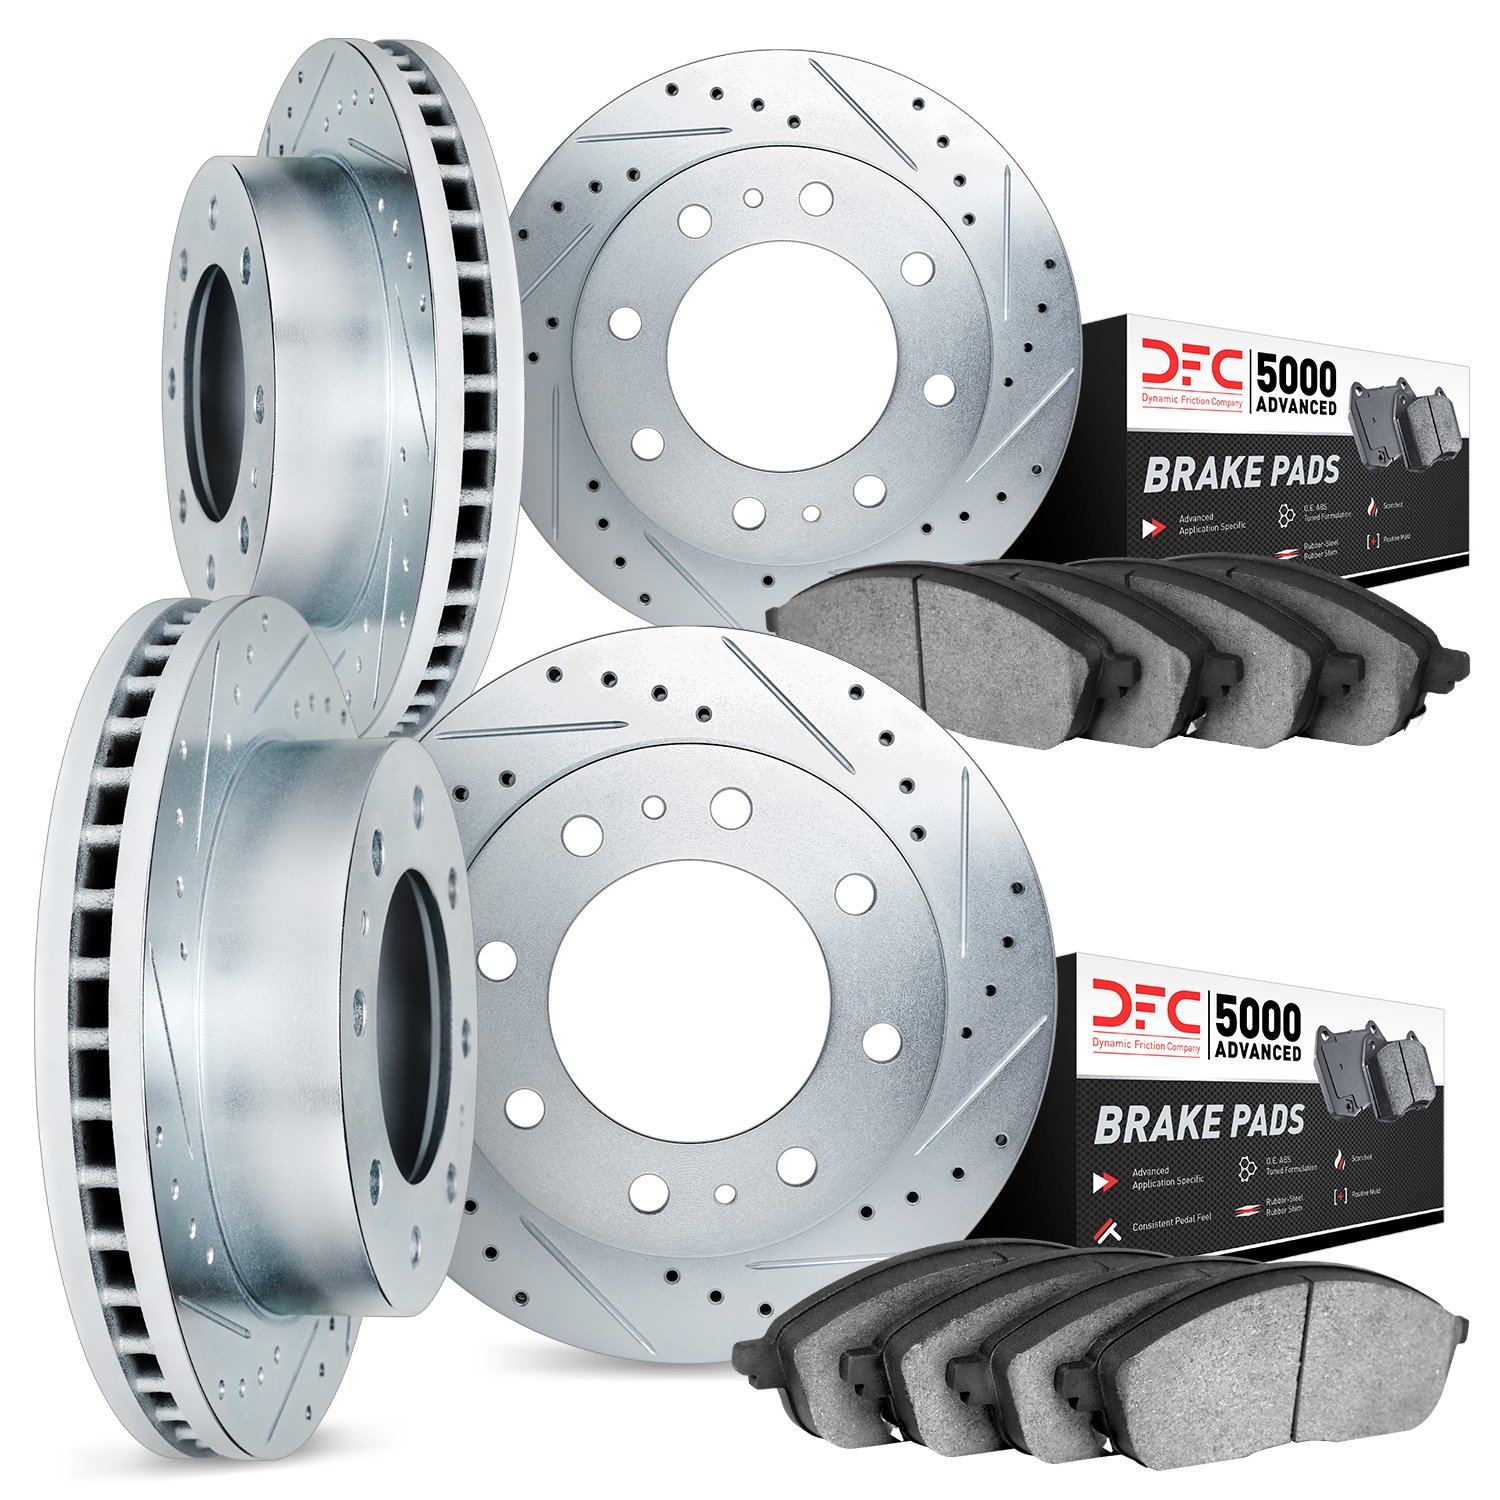 7504-48023 Drilled/Slotted Brake Rotors w/5000 Advanced Brake Pads Kit [Silver], 2005-2017 GM, Position: Front and Rear